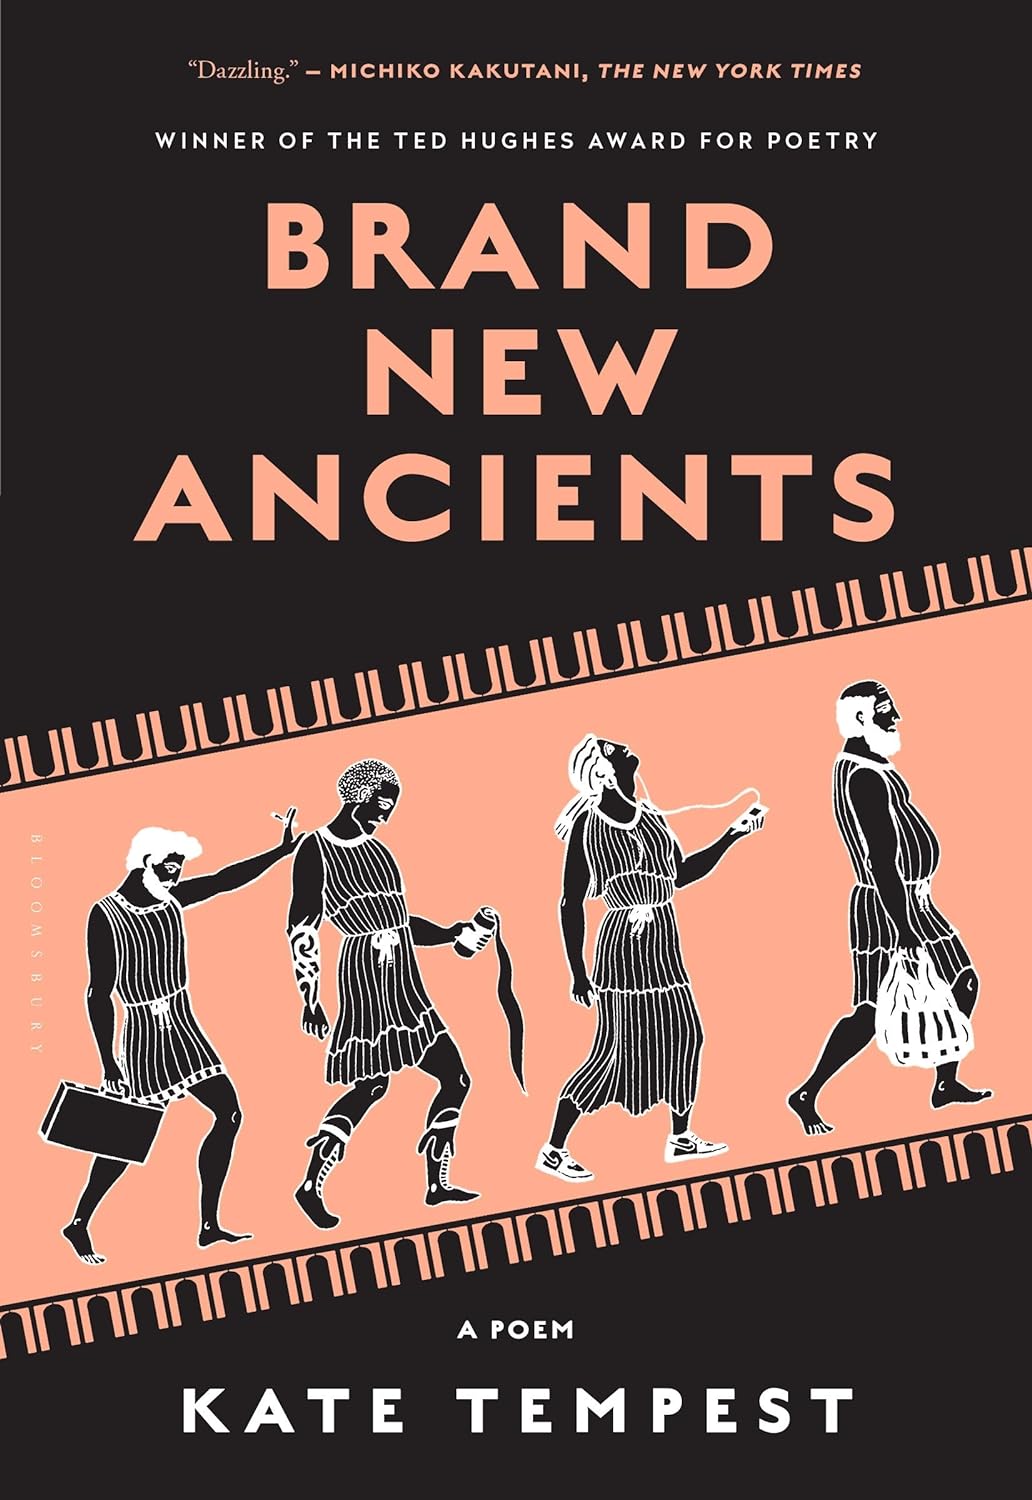 Brand new ancients (2015)